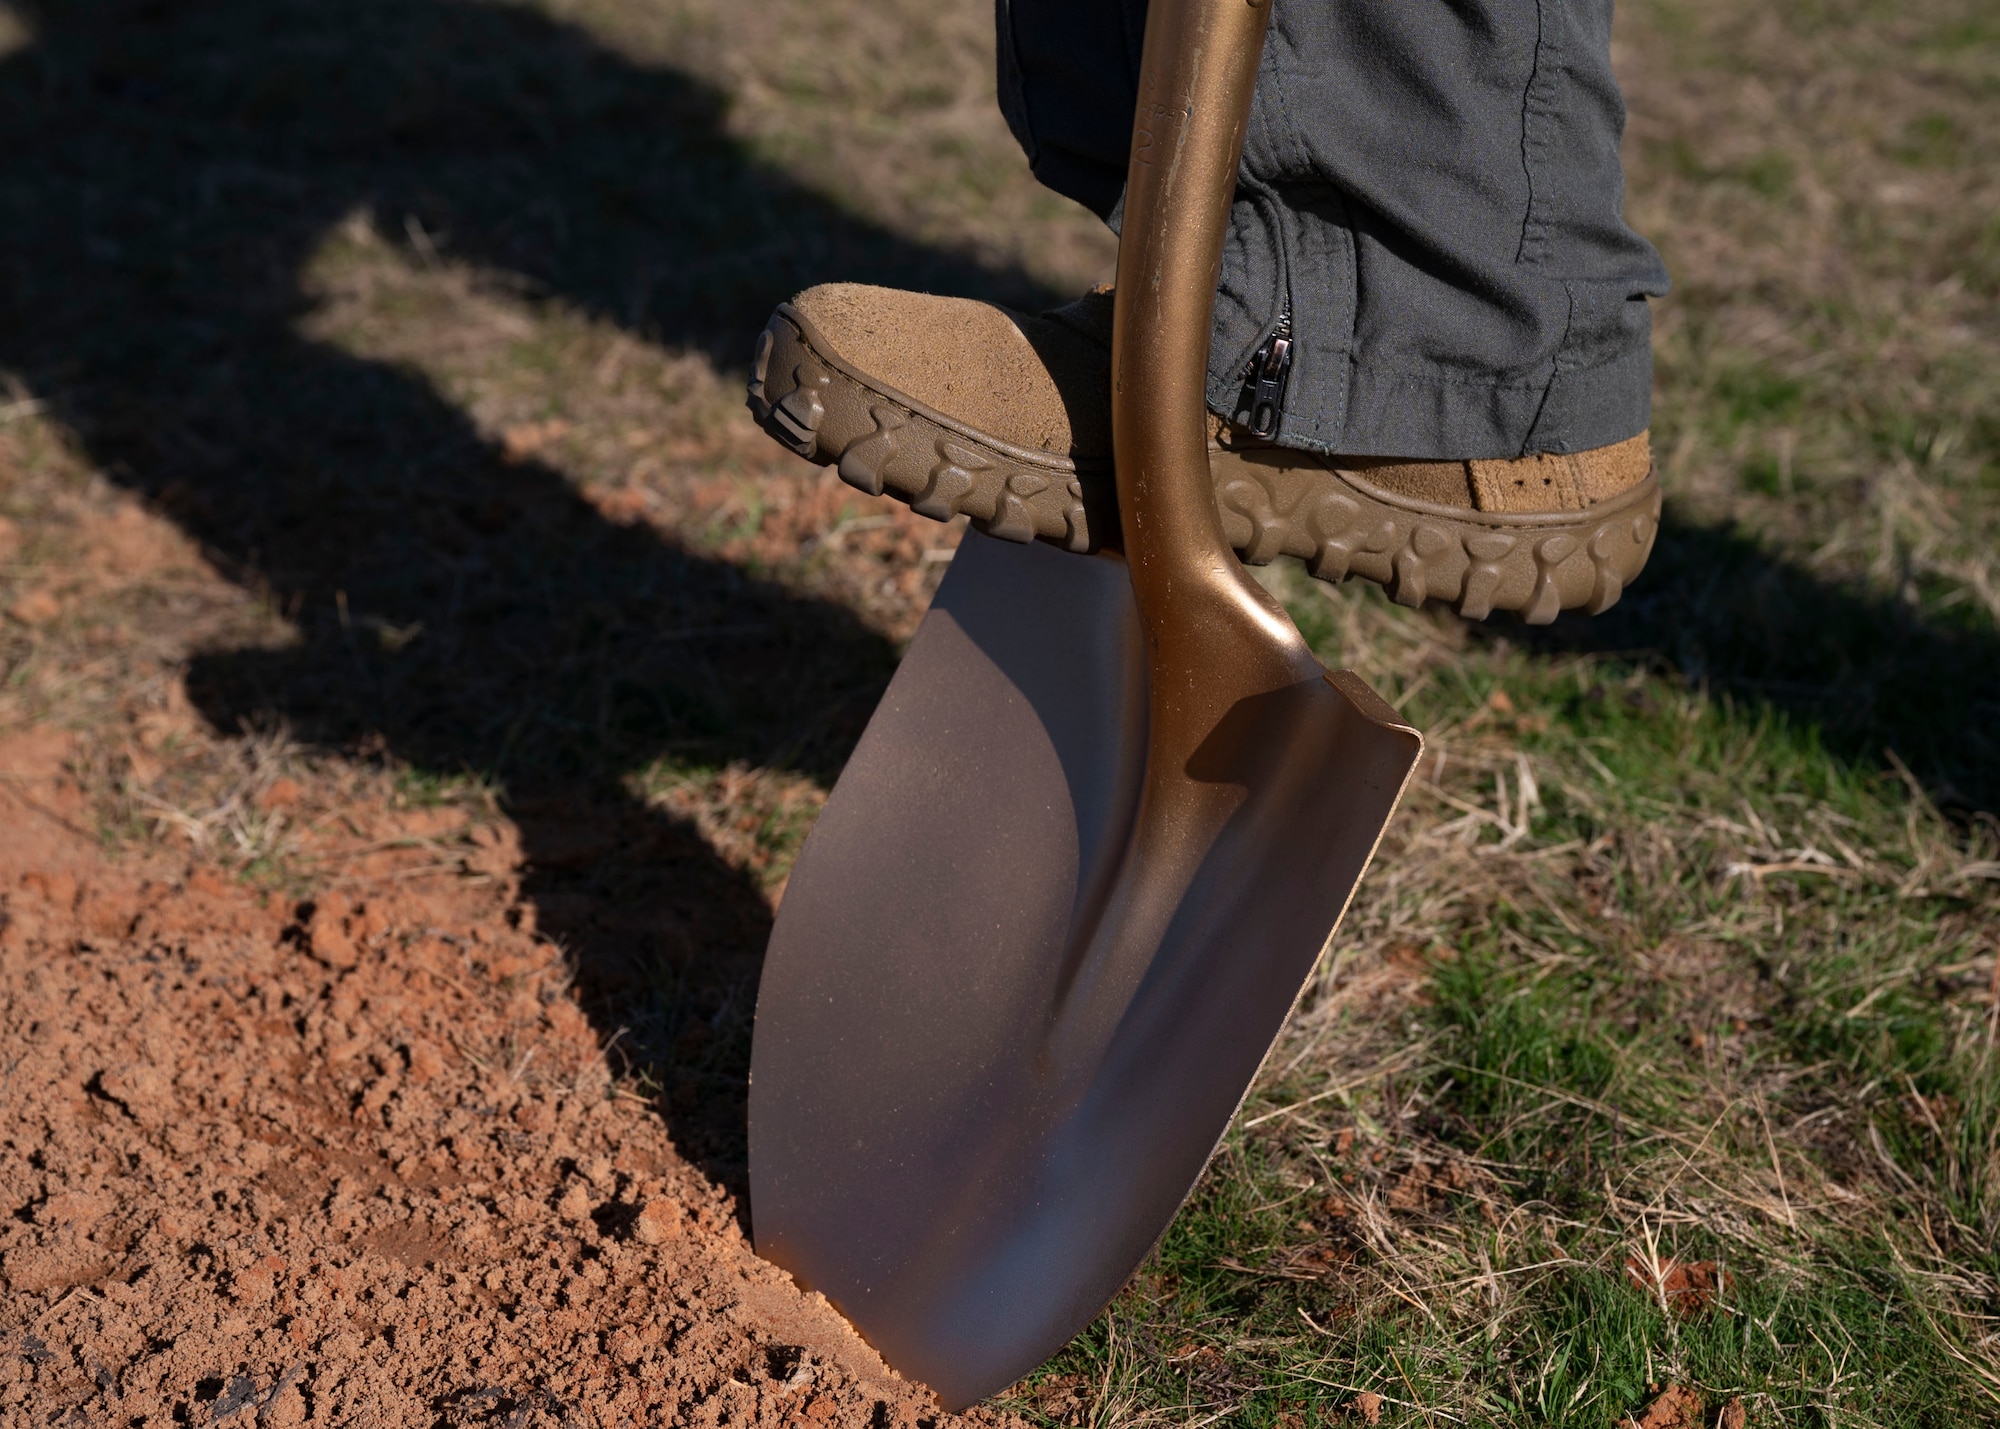 20th Fighter Wing Col. stands on shovel during an Arbor Day ceremony